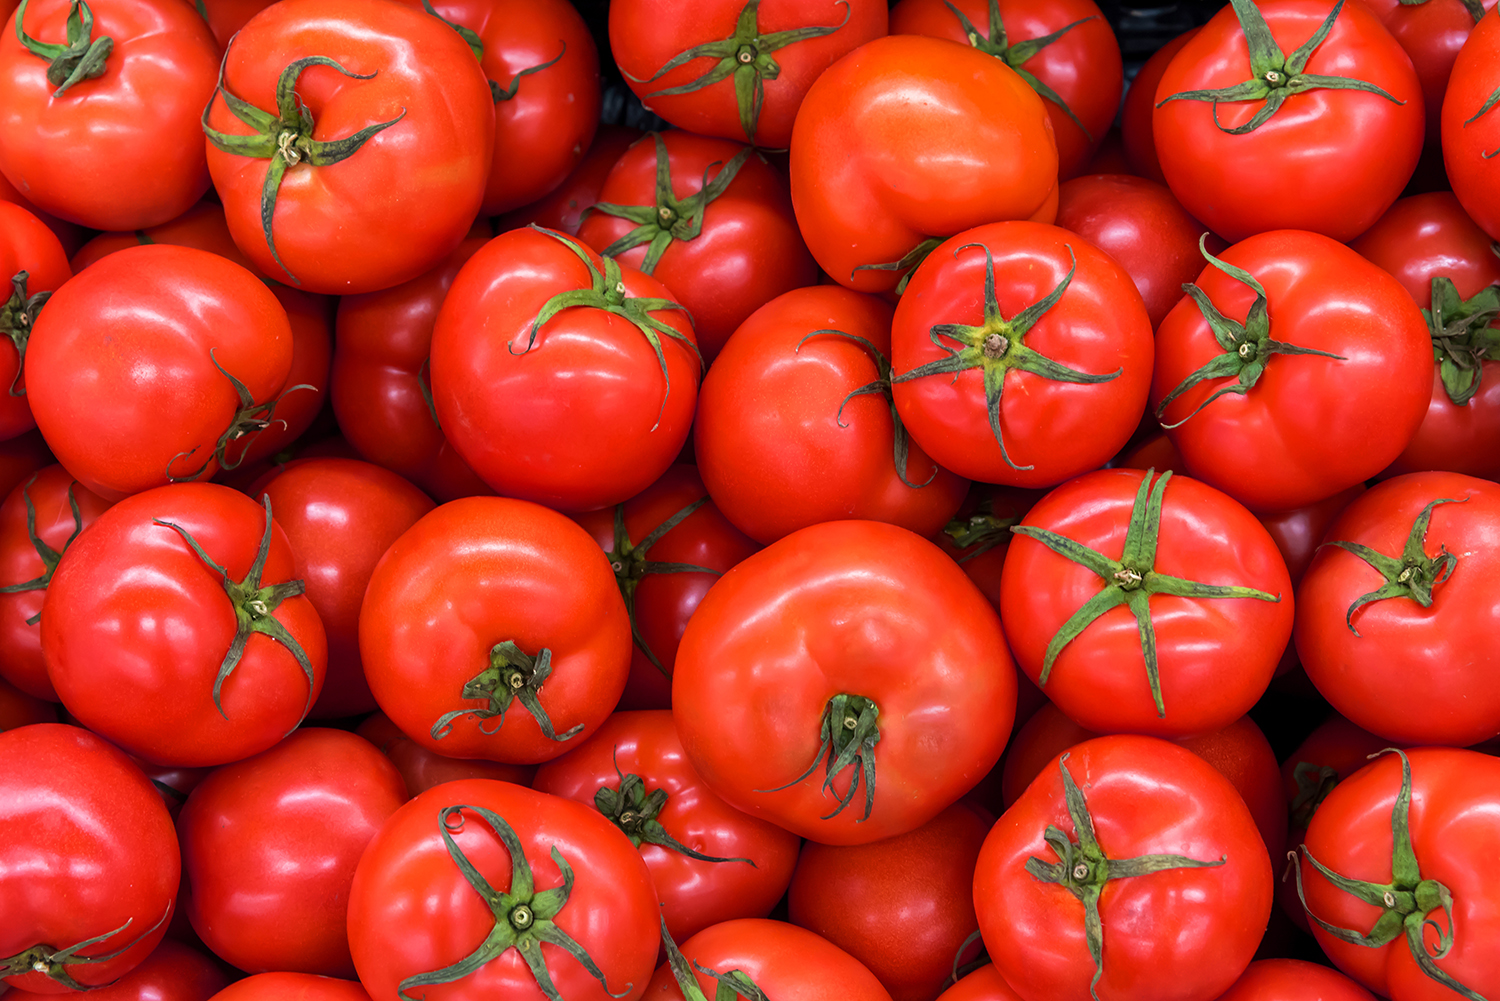 Plant nutrition for tomatoes